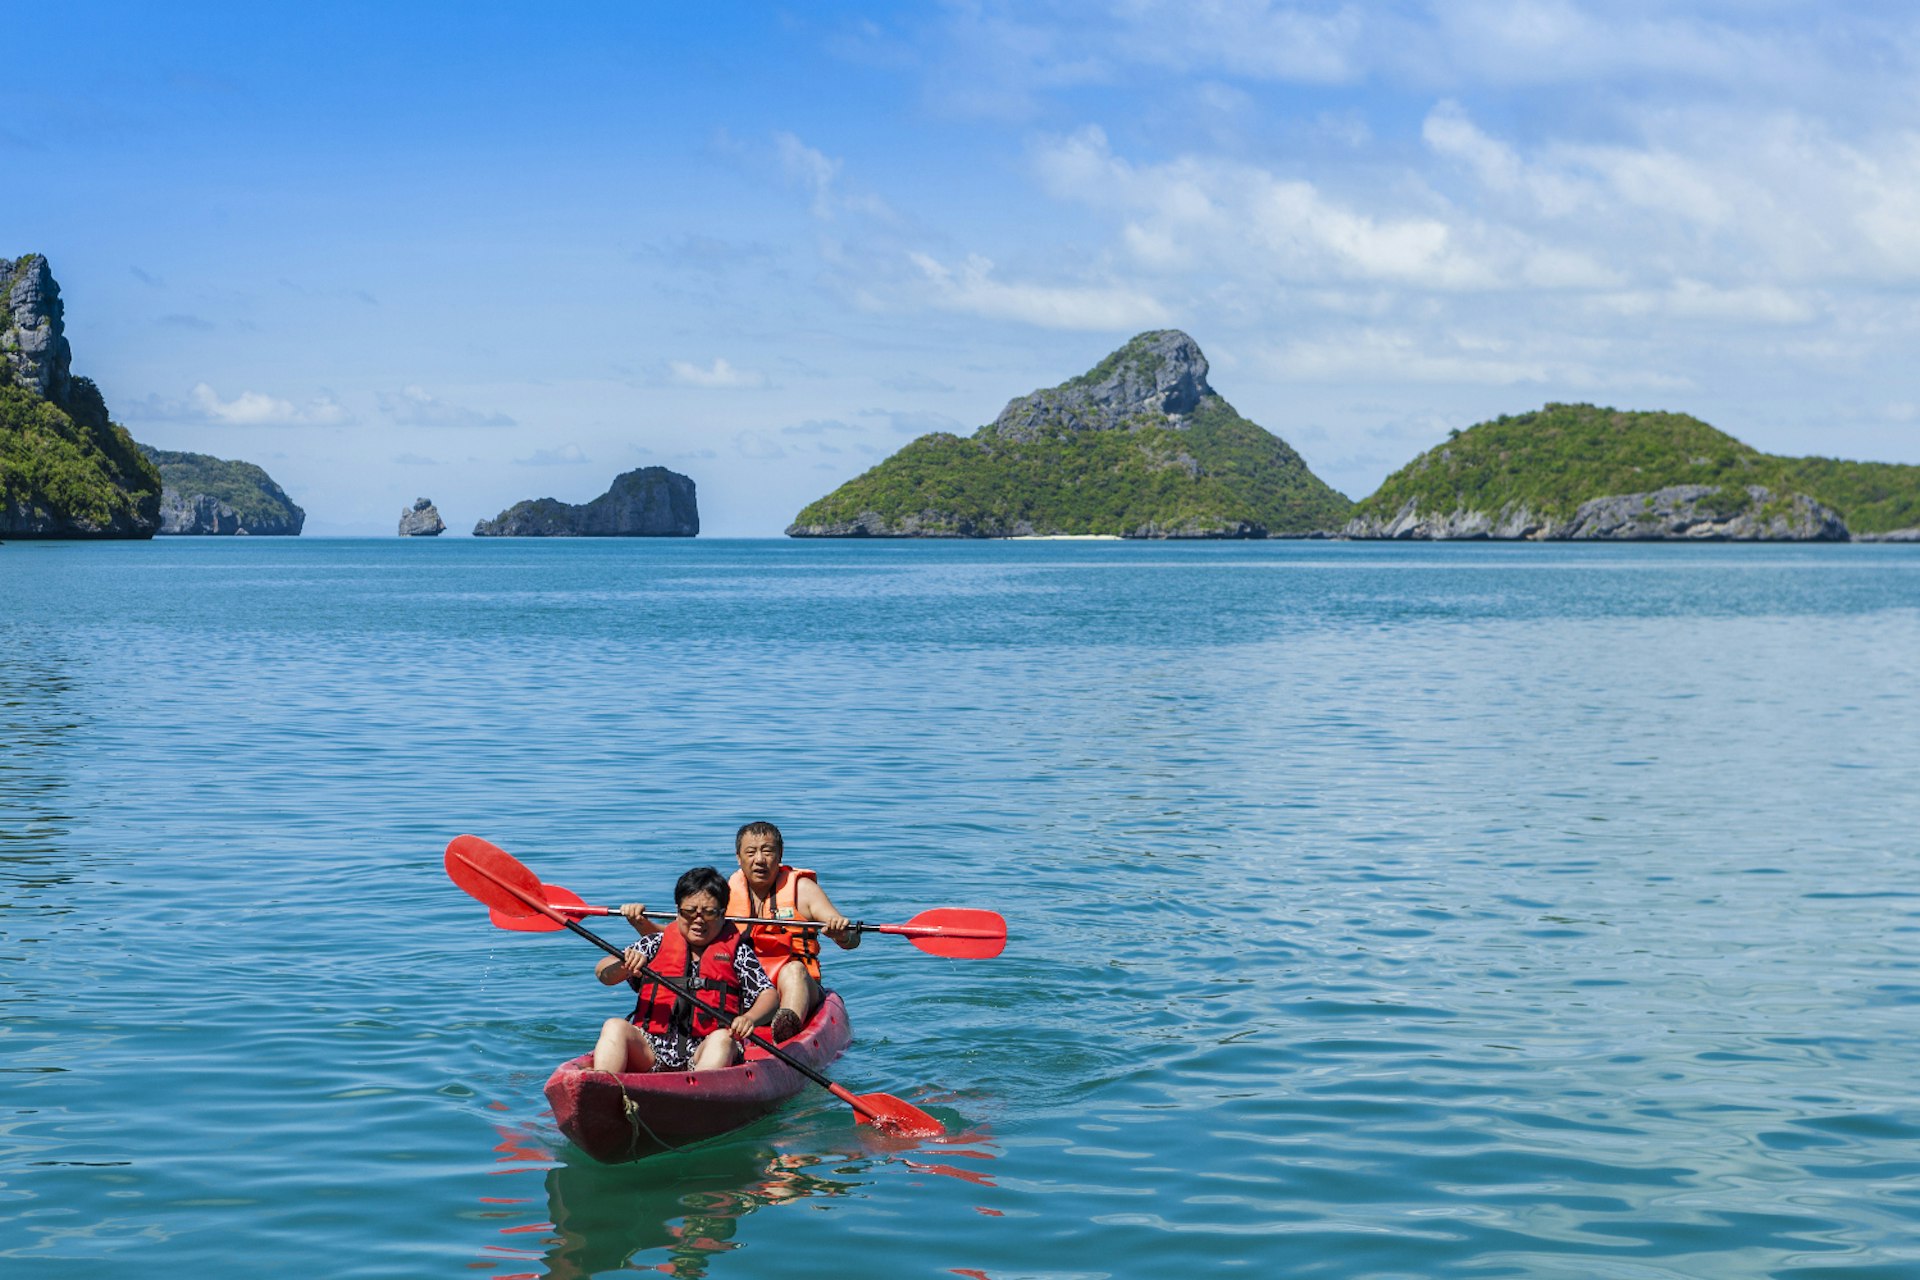 Thailand's Ang Thong National Marine Park is perfect for kayaking © Felix Hug / Getty Images